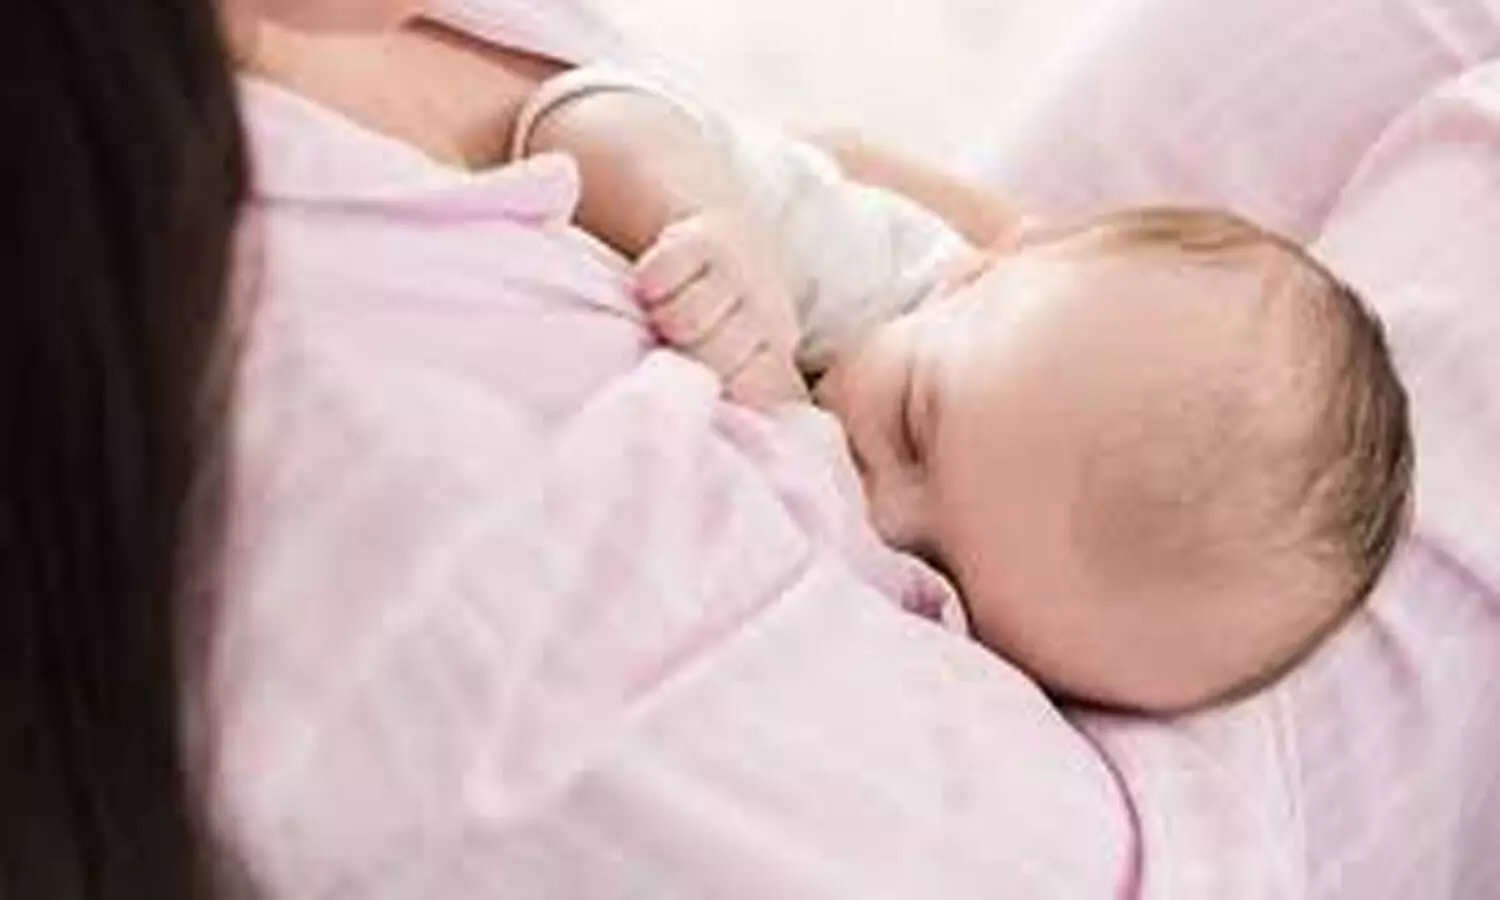 Sharing nighttime infant care can reduce sleep disturbance in new mothers, study finds